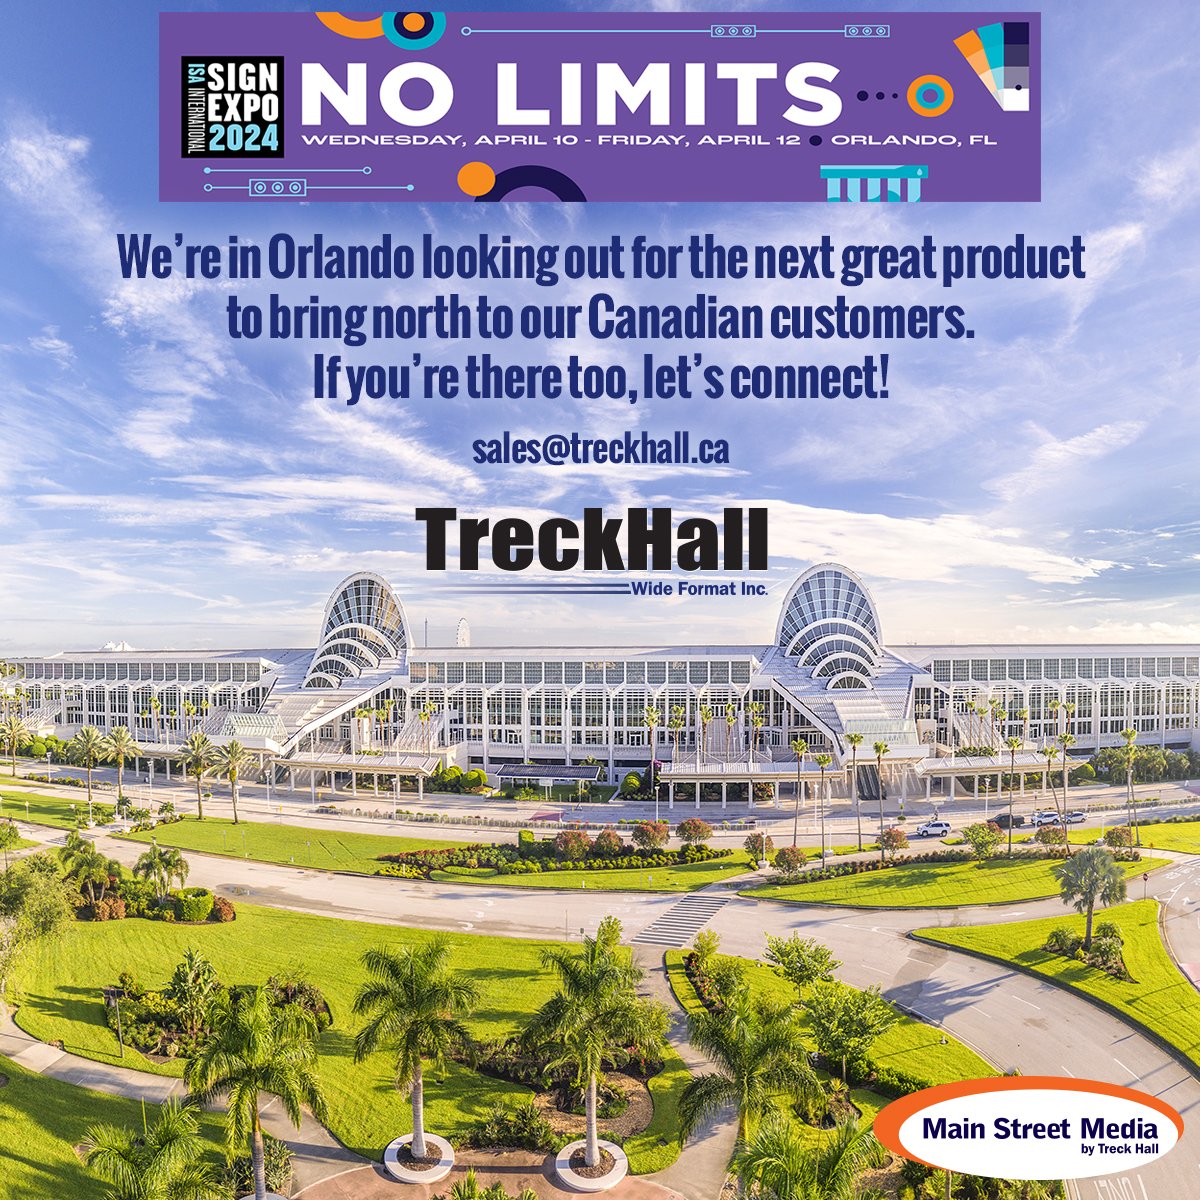 Hello, Sunny Orlando!☀️It's showtime! The #TreckHall team is in town for #ISASignExpo2024. Give us a shout and let's meet up: email us at sales@treckhall.ca
#NOLIMITS #WideFormat #Signs #Signage